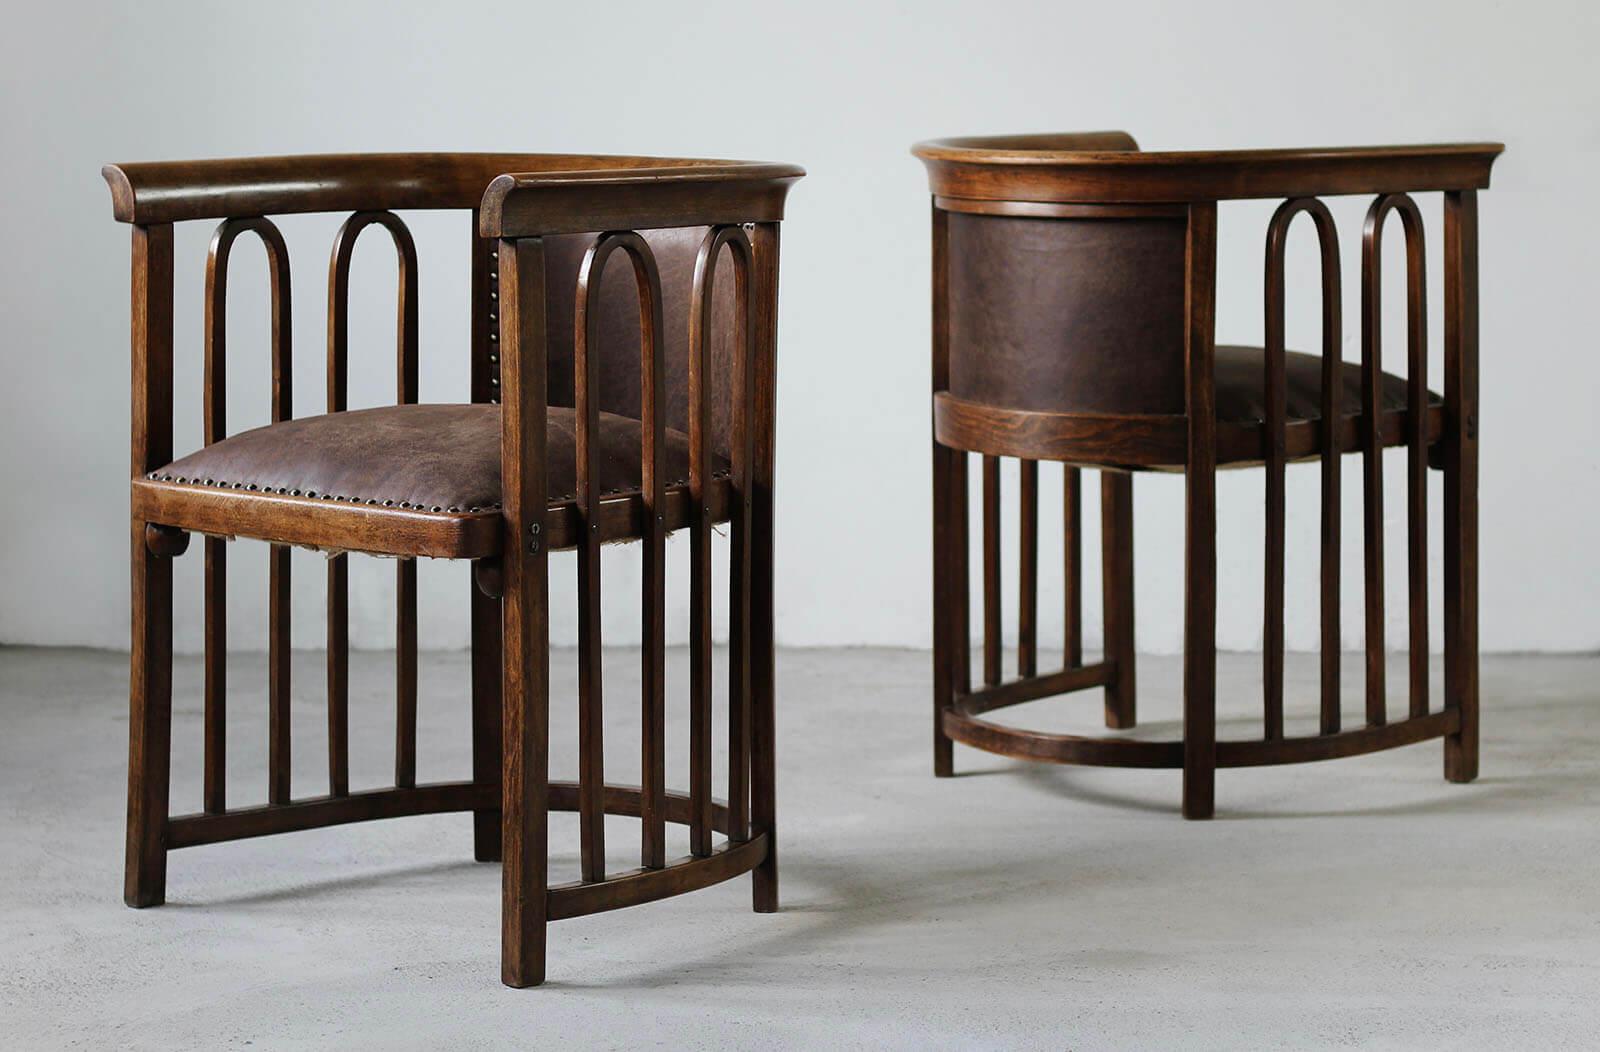 Wood Set of 2 Armchairs designed by J. Hoffman, Model No. 423, Early 20th Century For Sale